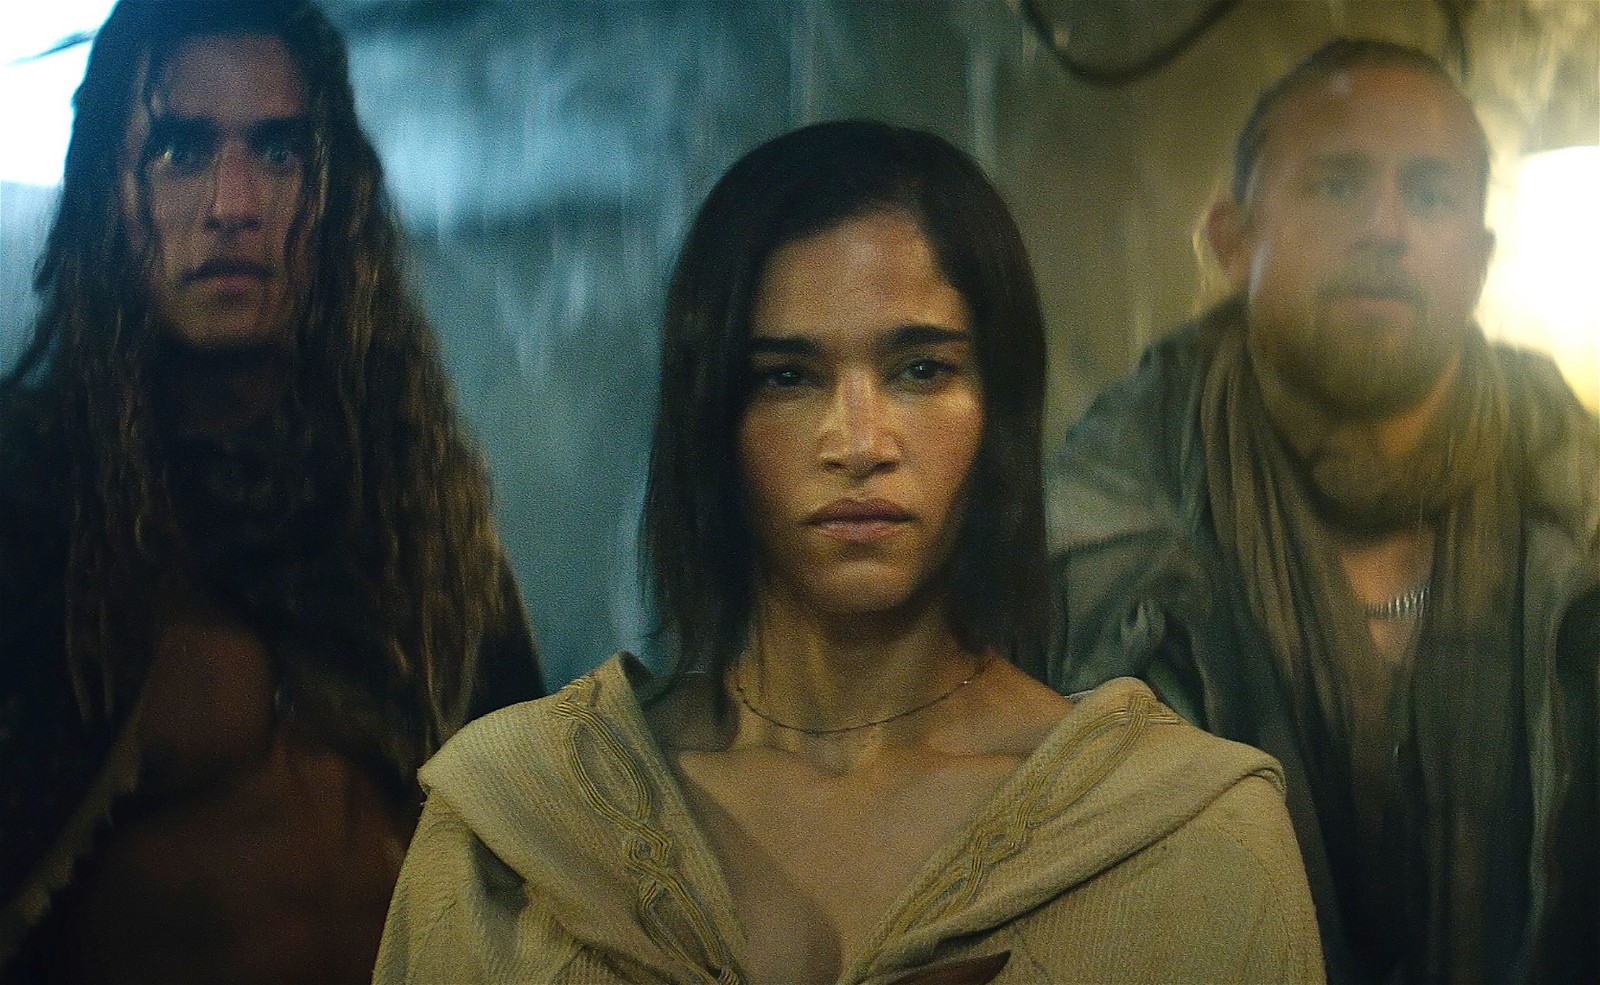 Sofia Boutella feels the harsh criticism of Rebel Moon was undeserved